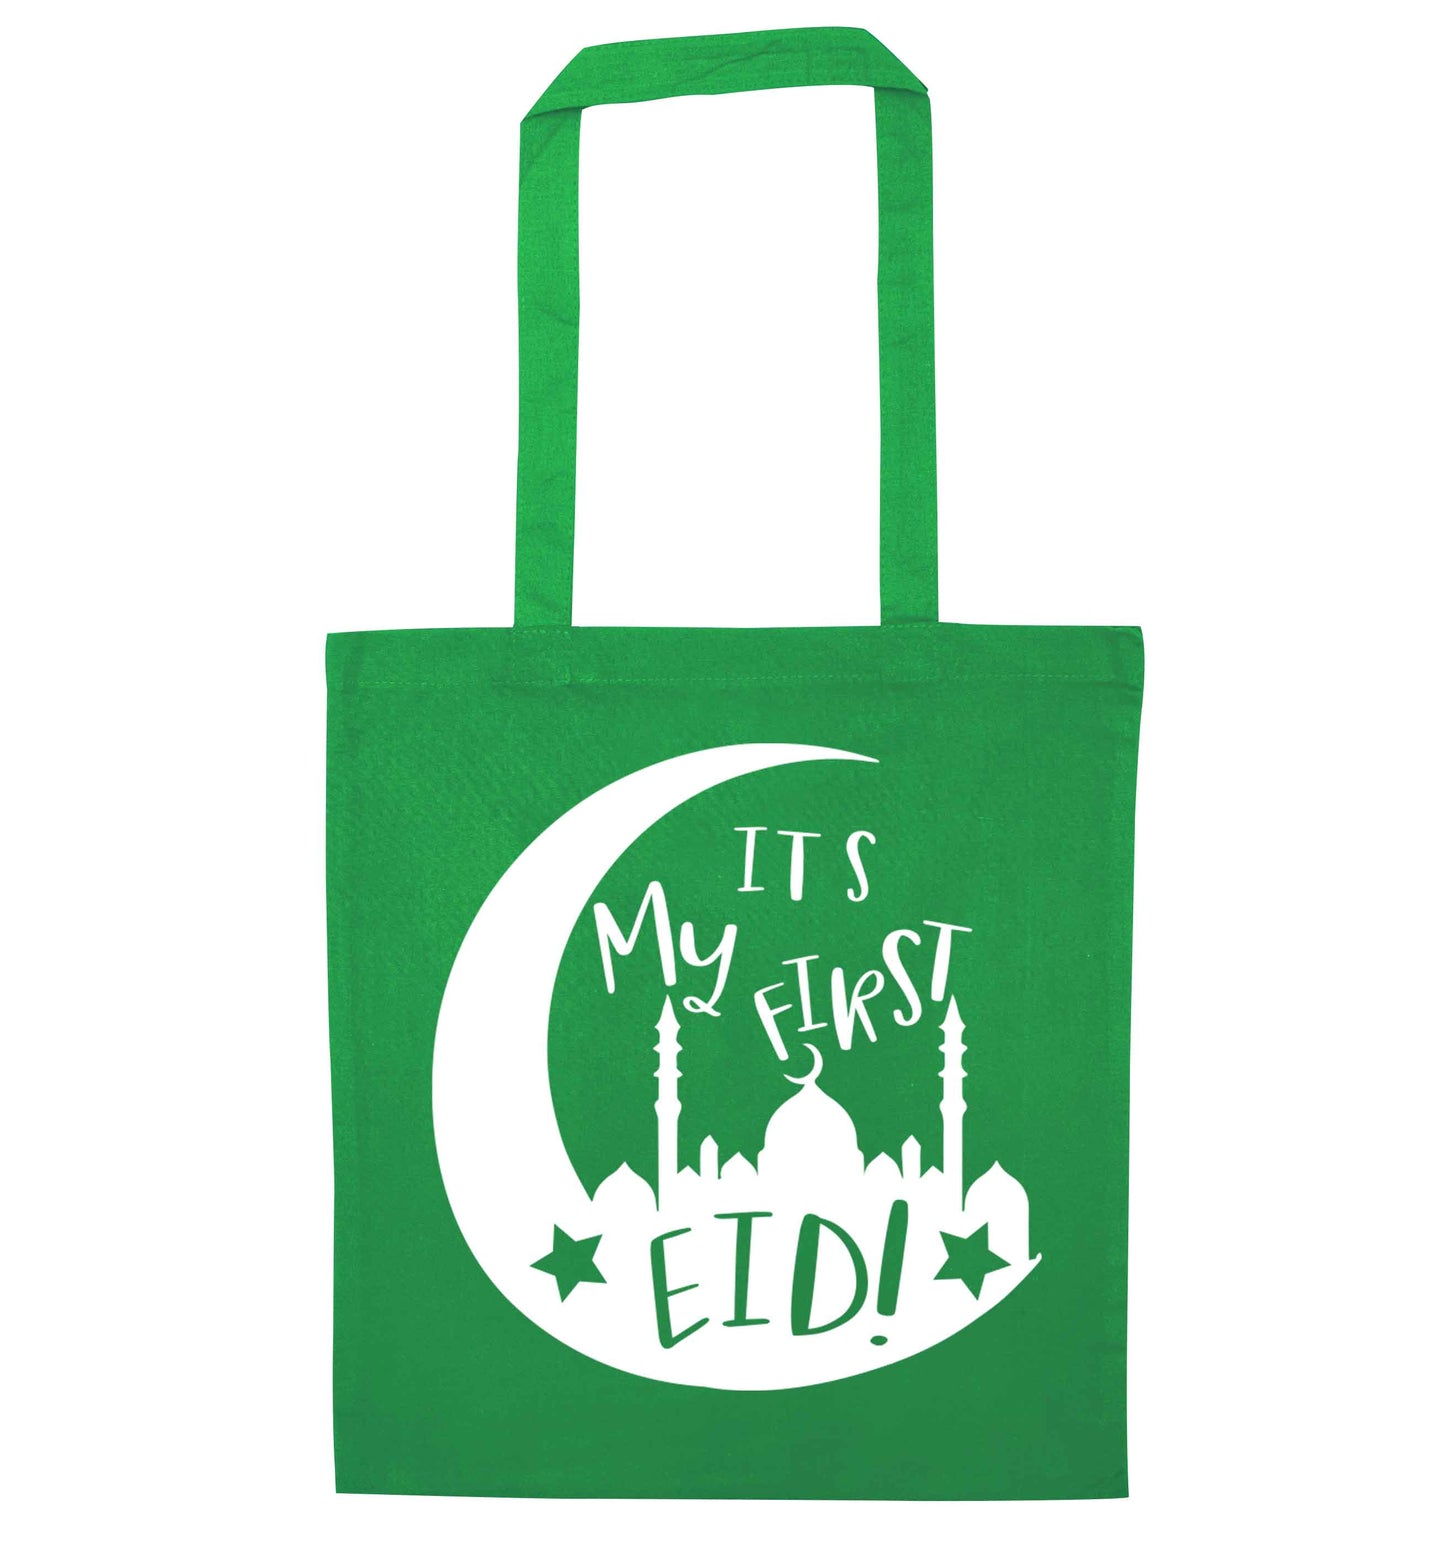 It's my first Eid moon green tote bag